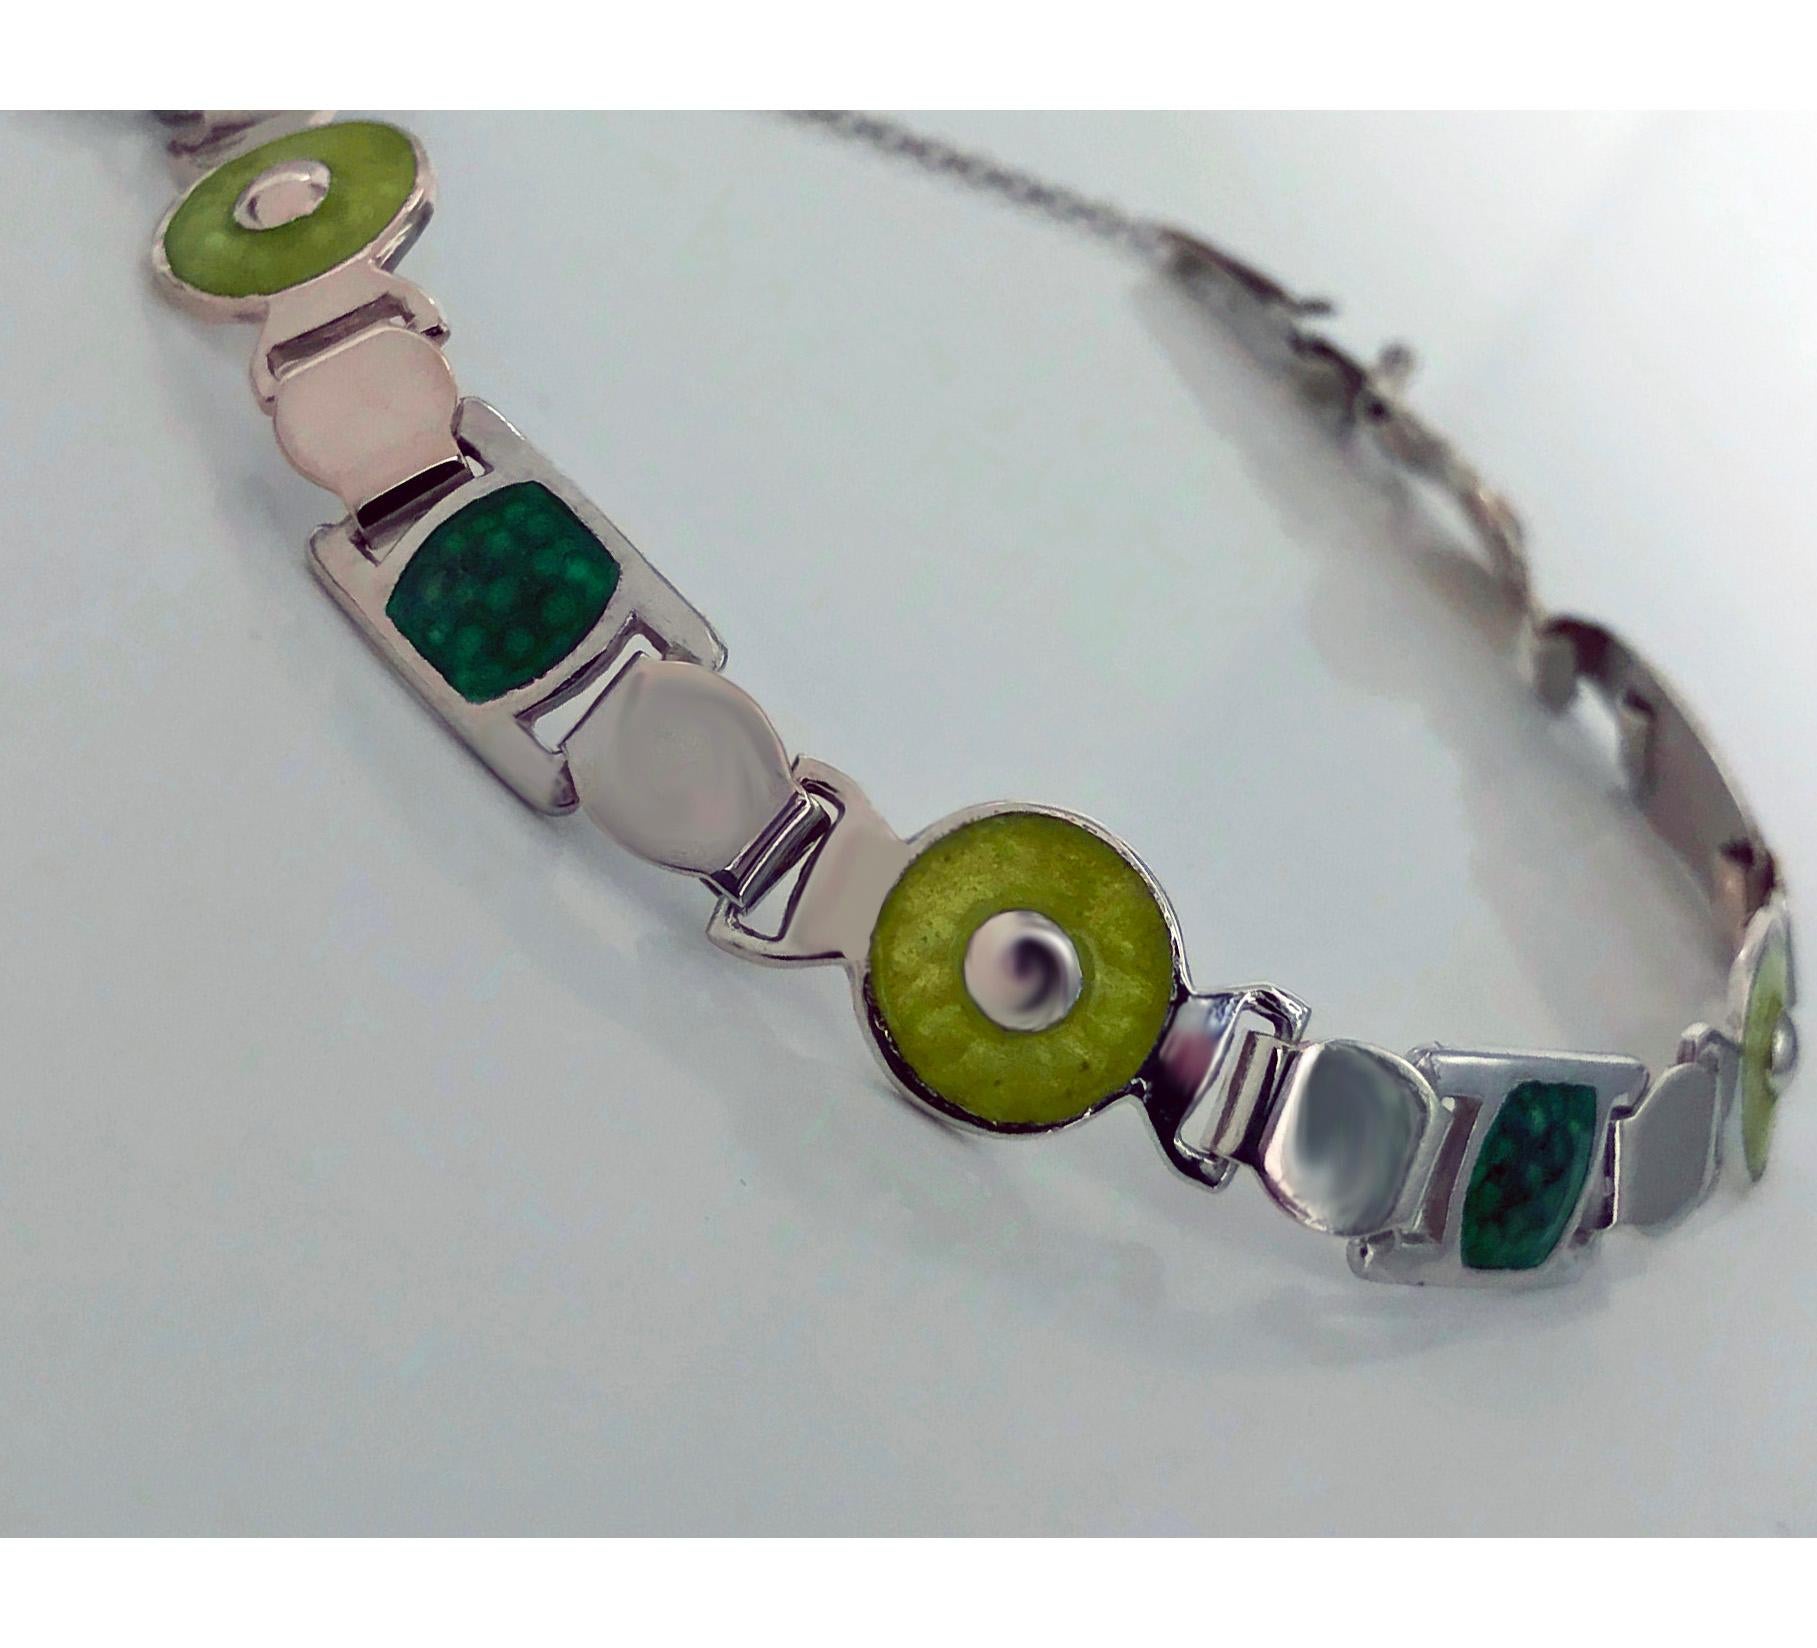 English Arts and Crafts Silver and Enamel Bracelet, Birmingham 1909 James Fenton The Bracelet with ovoid, circular and rectangular green and lime enamel sections interspaced with plain polished silver slightly ovoid links, terminating with a